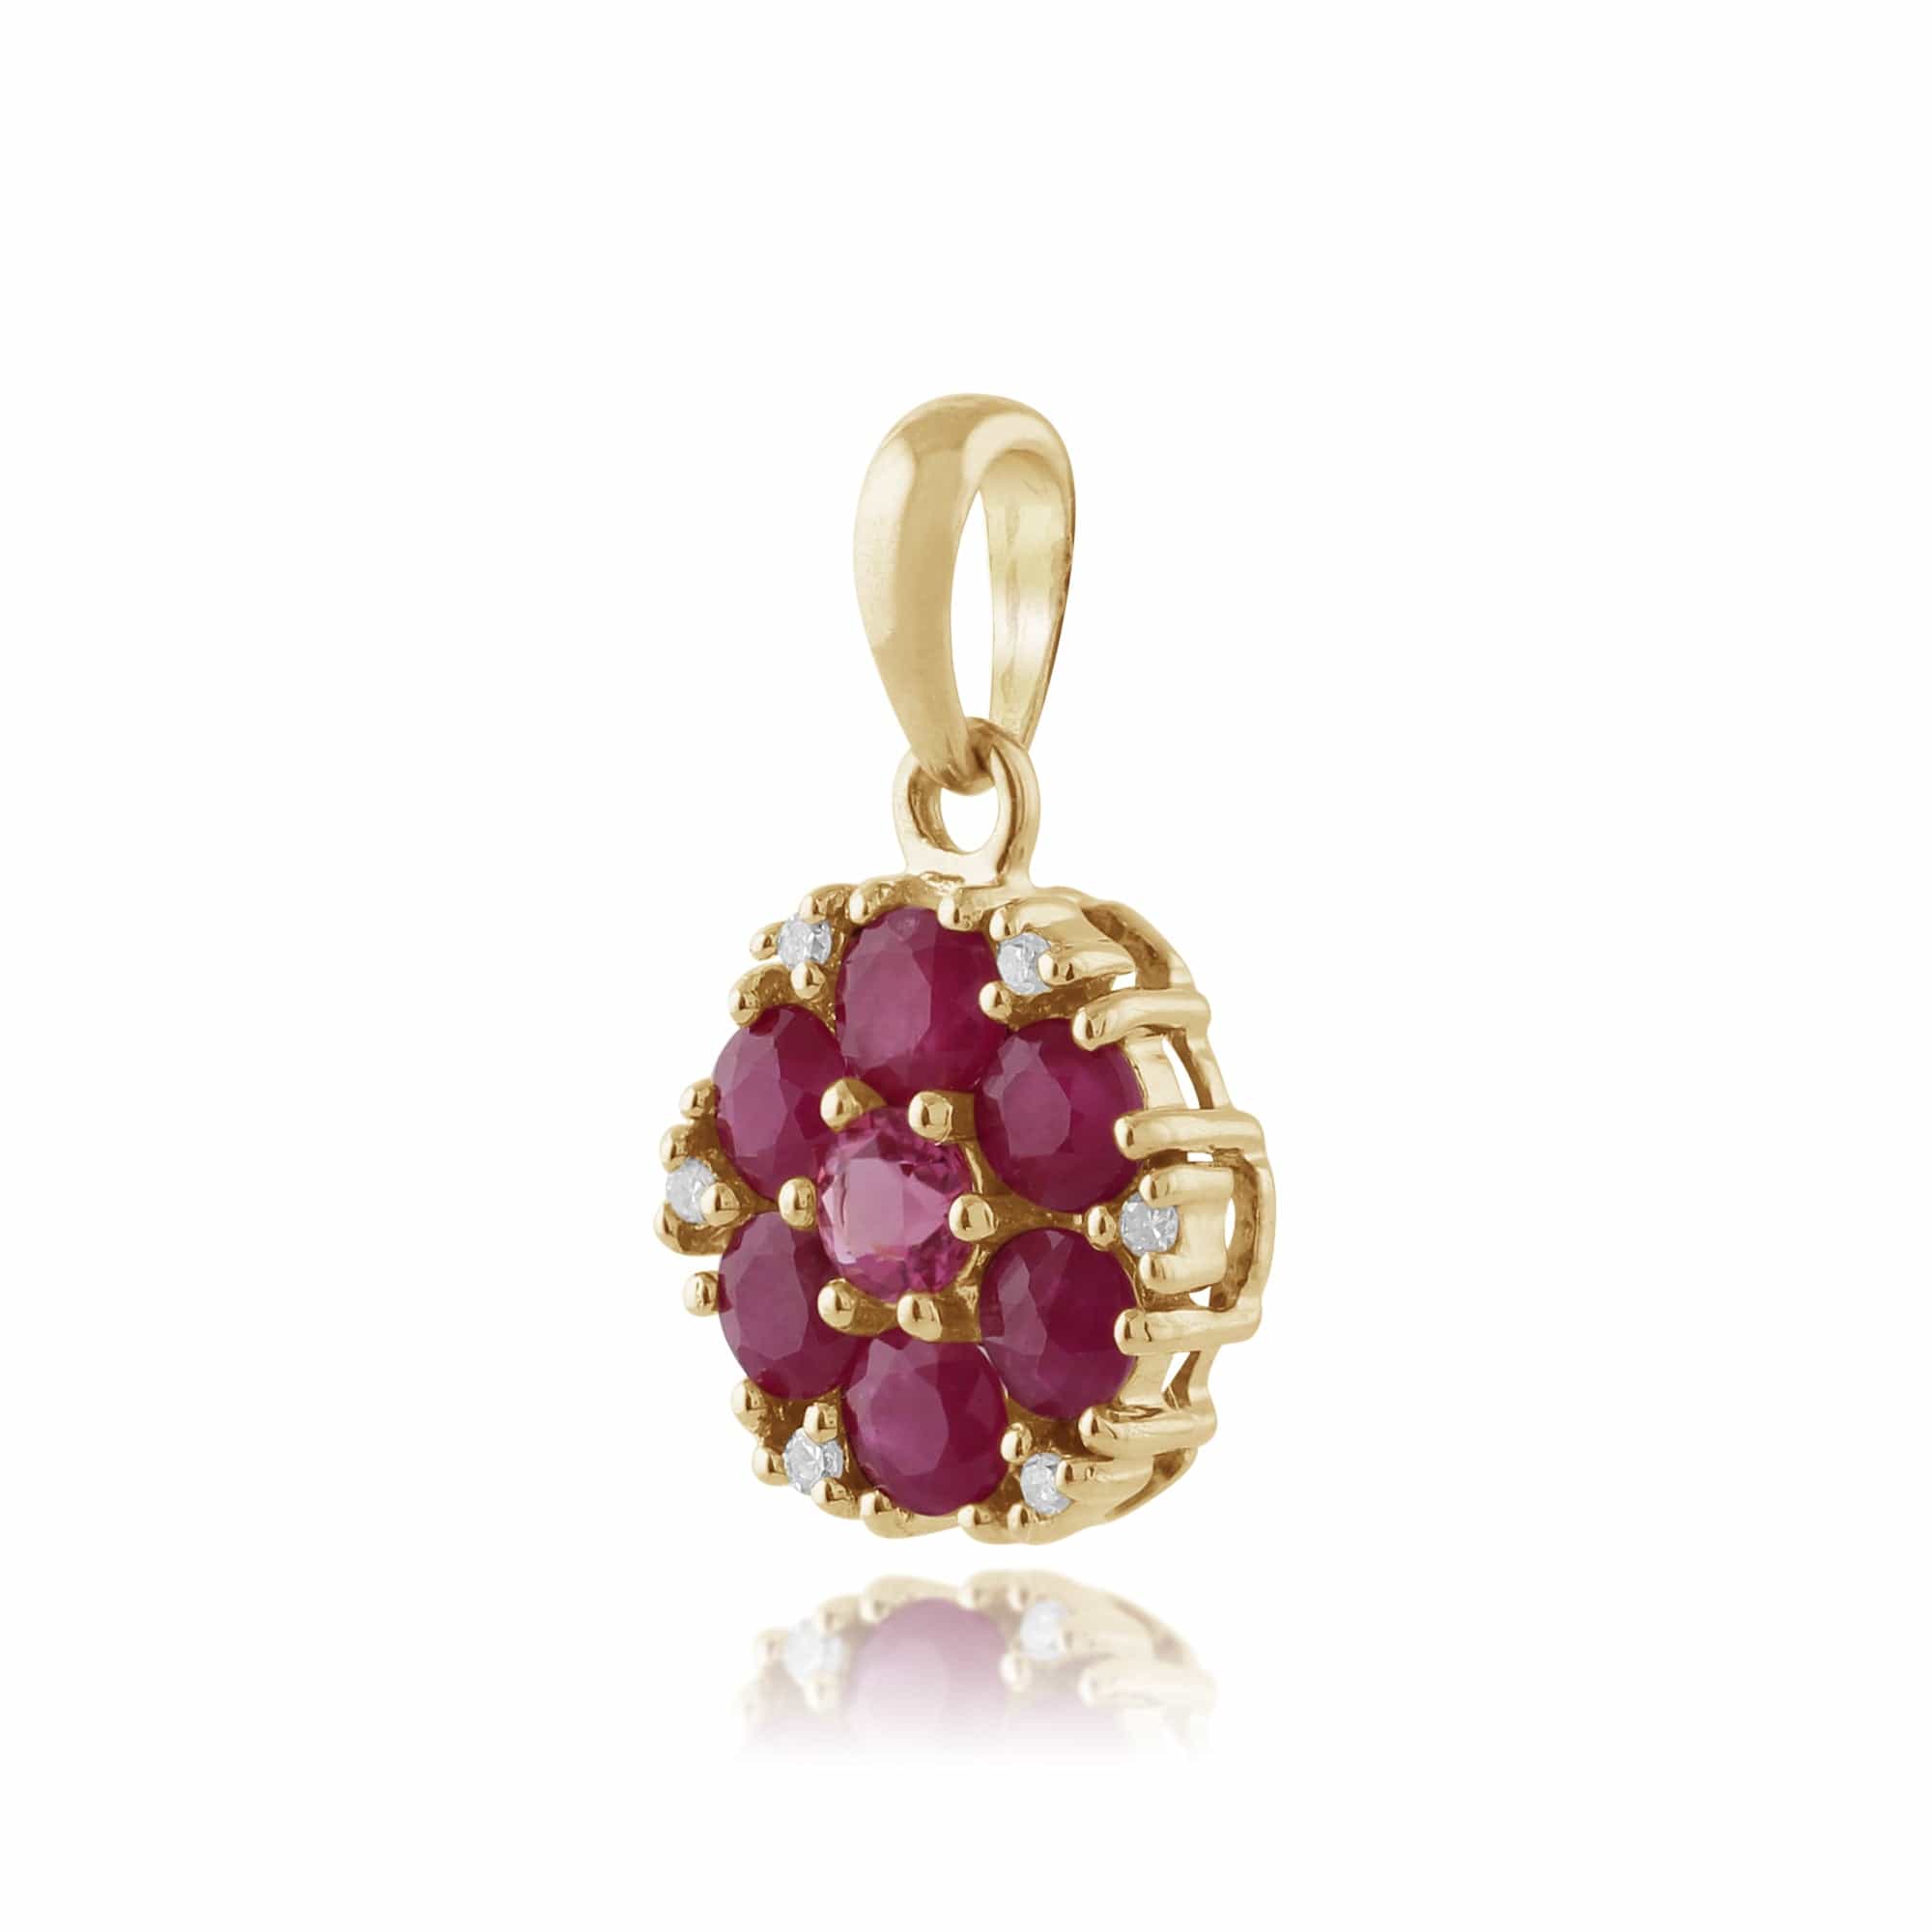 135P1472029 Floral Round Ruby, Pink Tourmaline & Diamond Pendant in 9ct Yellow Gold 2